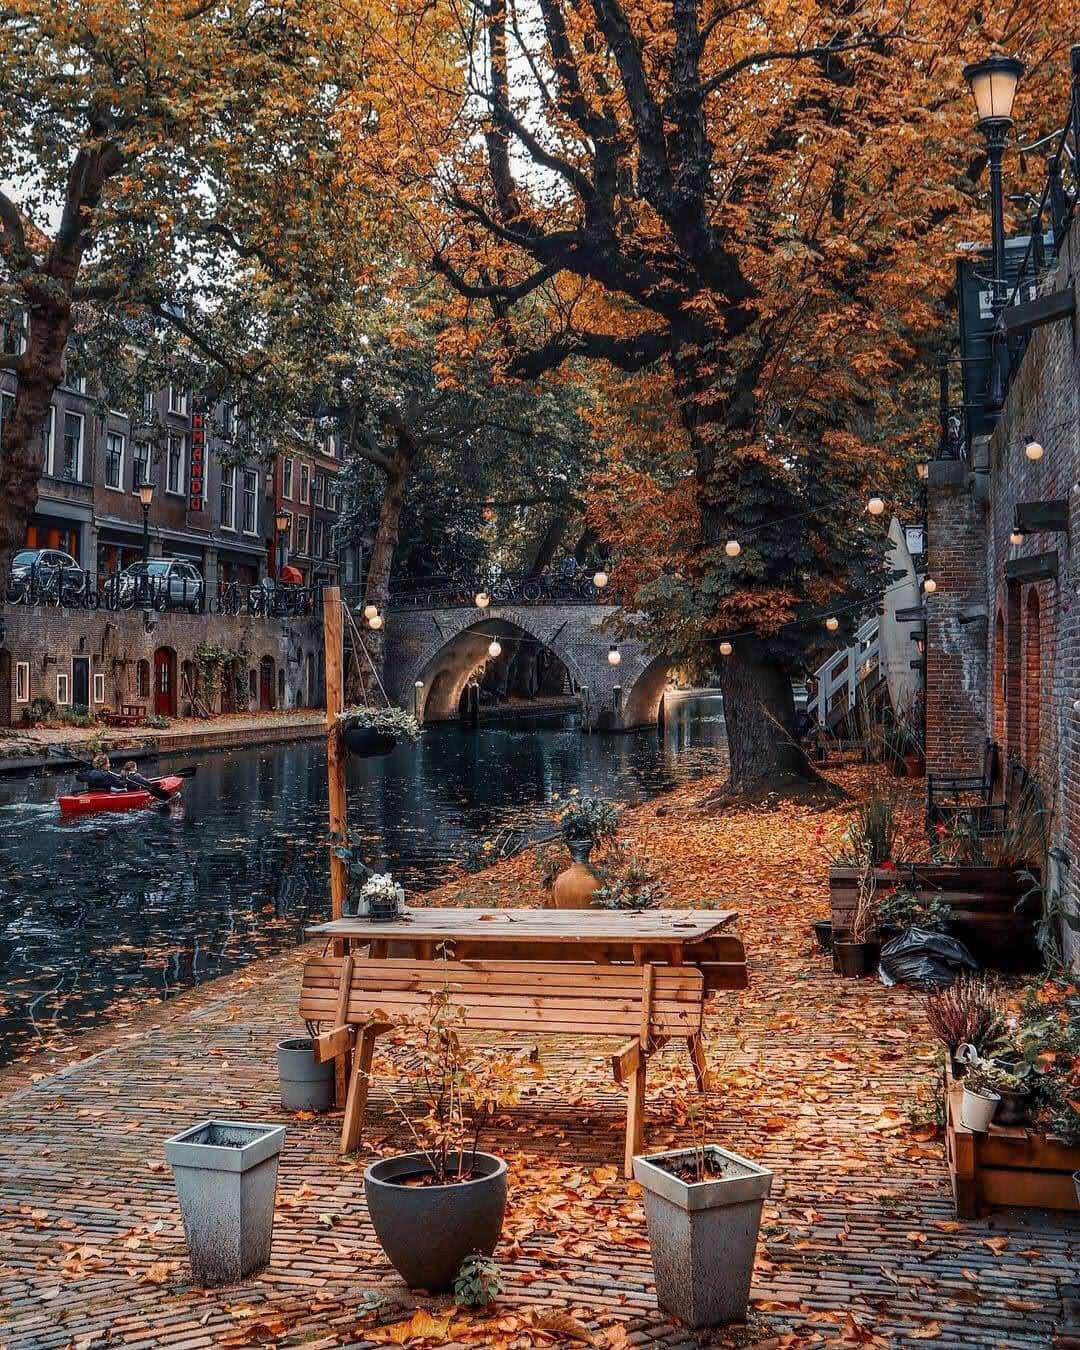 Autumn leaves by the canal in Utrecht 🍁